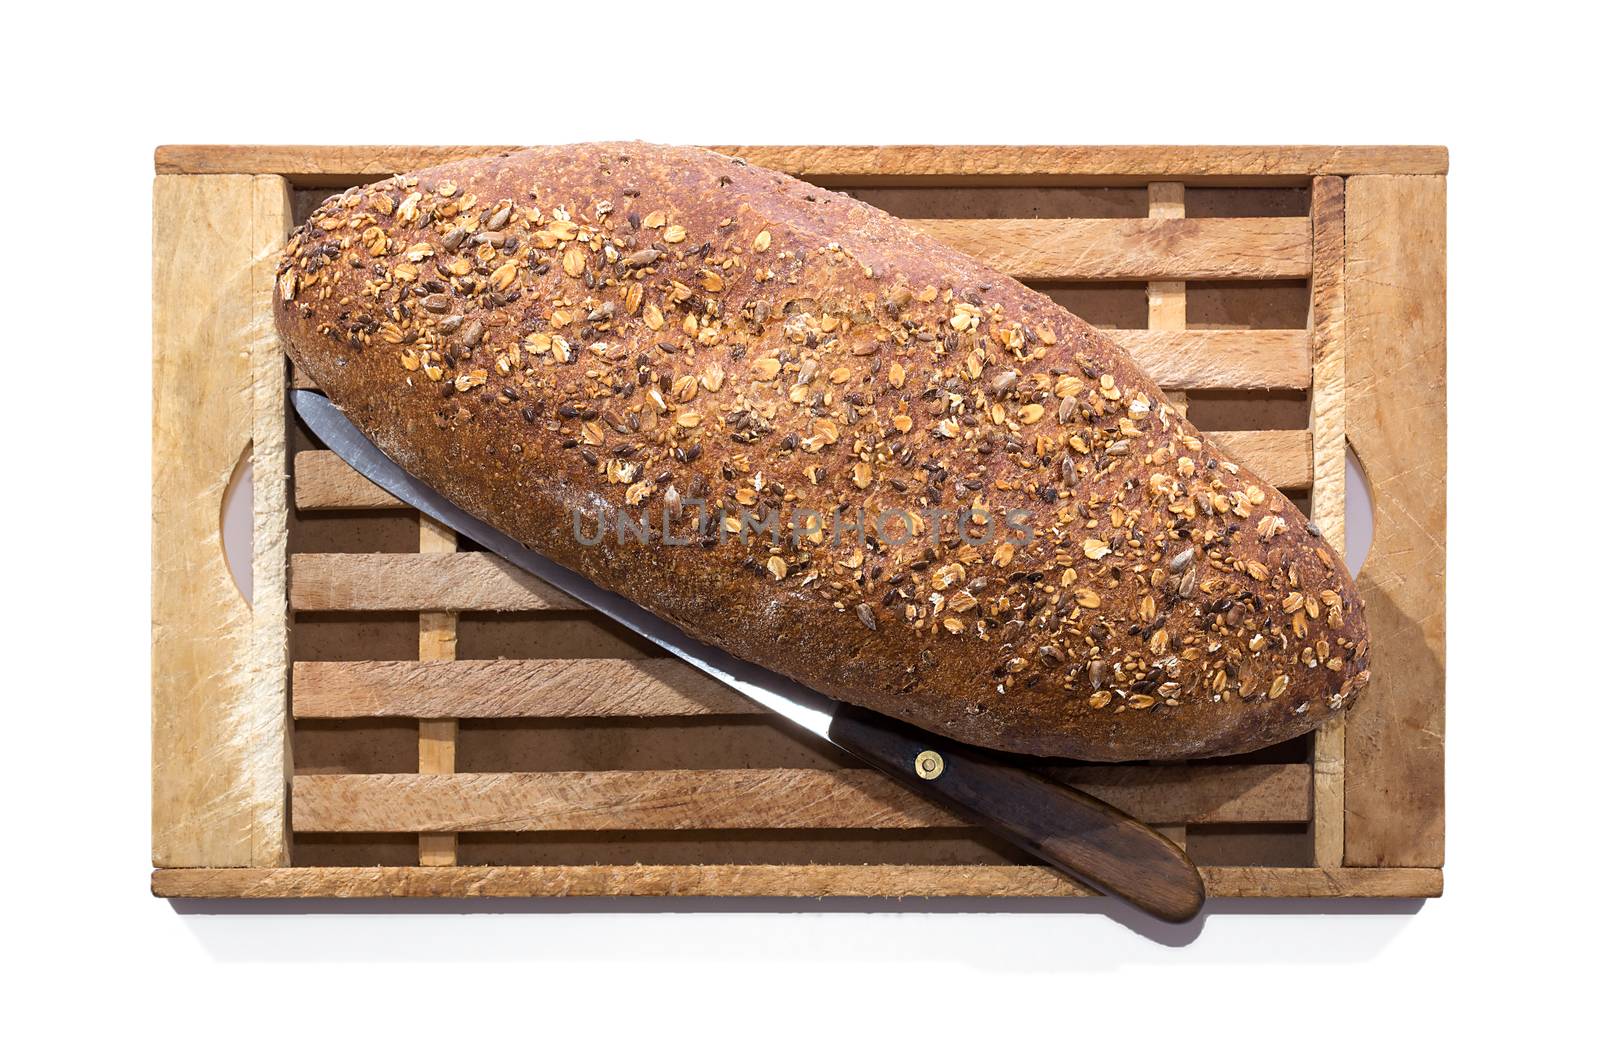 Whole Grain Bread and Vintage Knife on Wooden Cutting Board over white background, shot from above